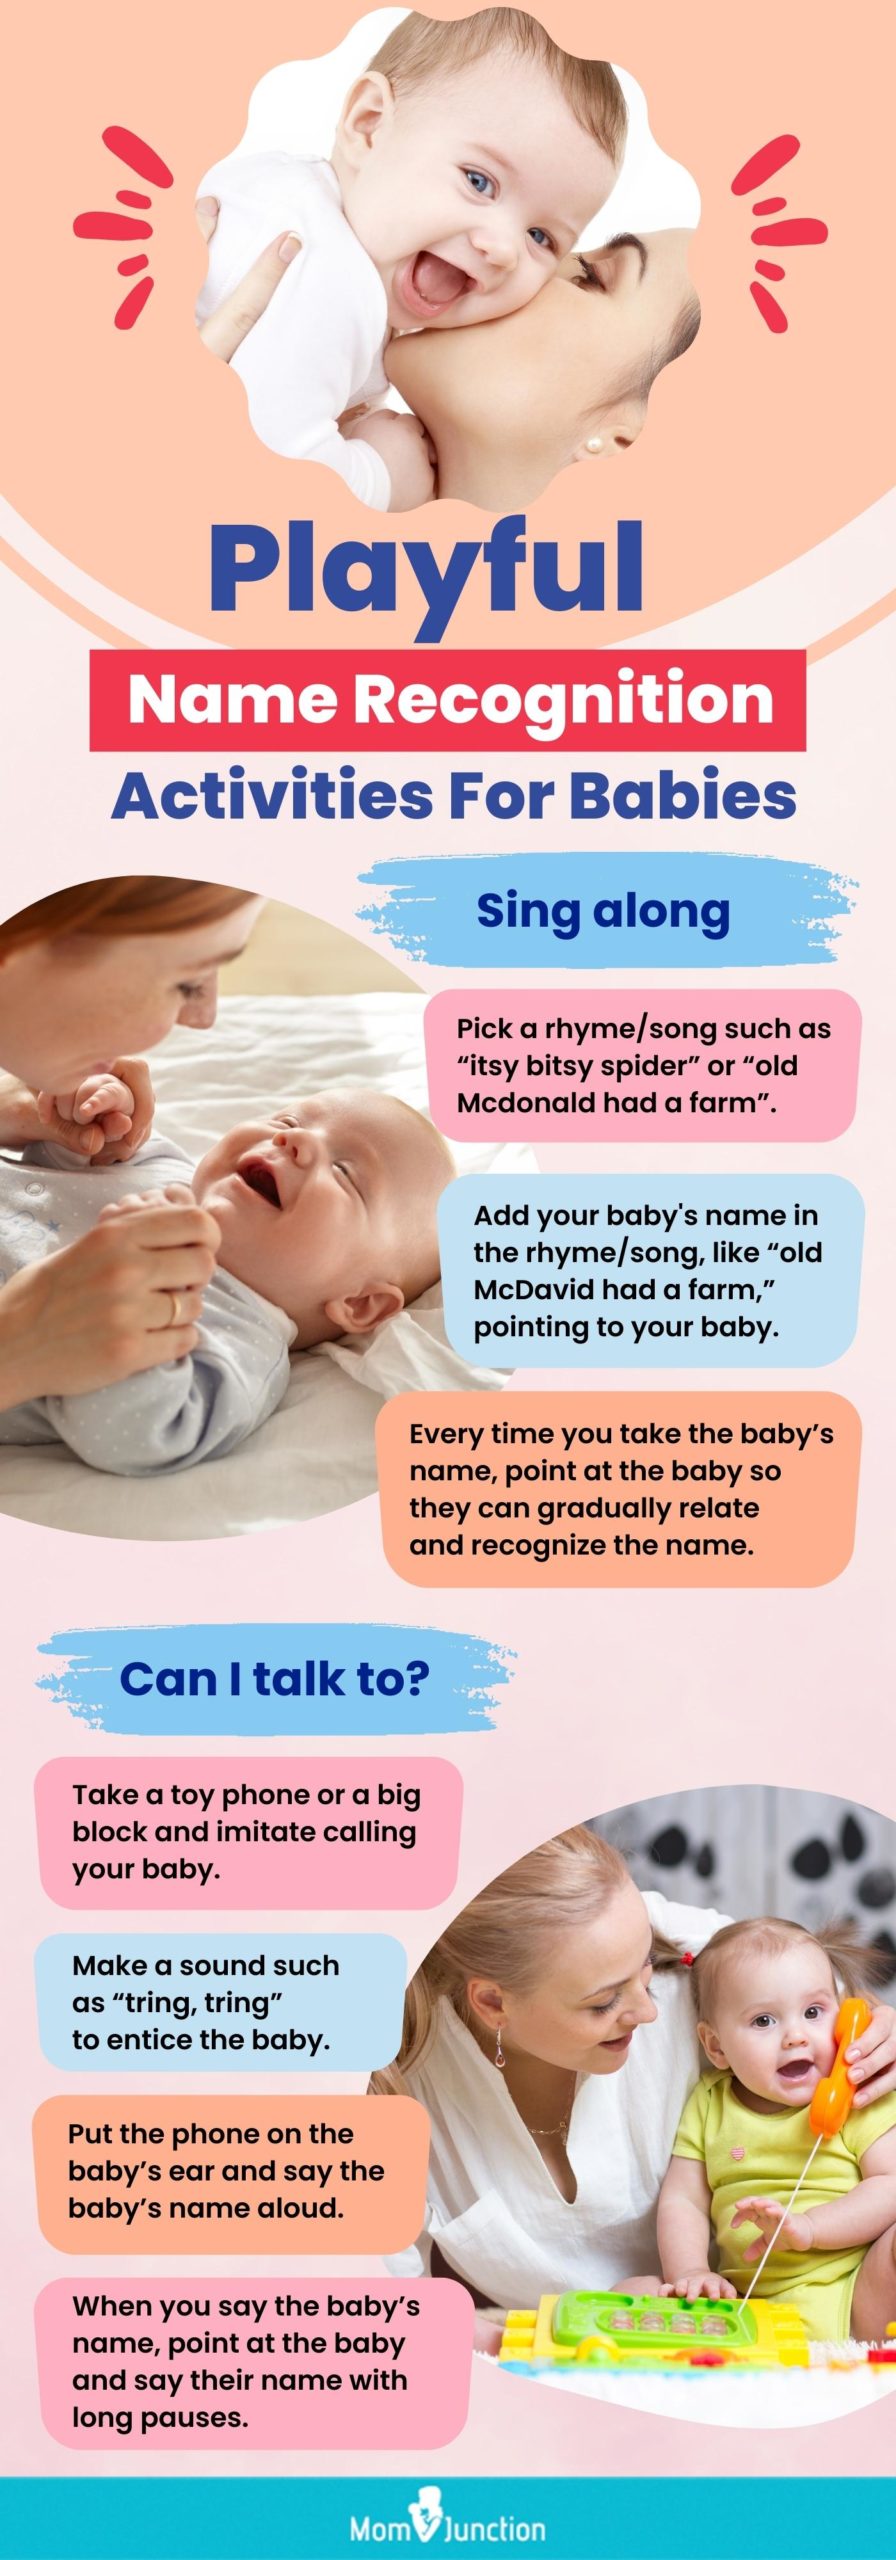 playful name recognition activities for babies (infographic)